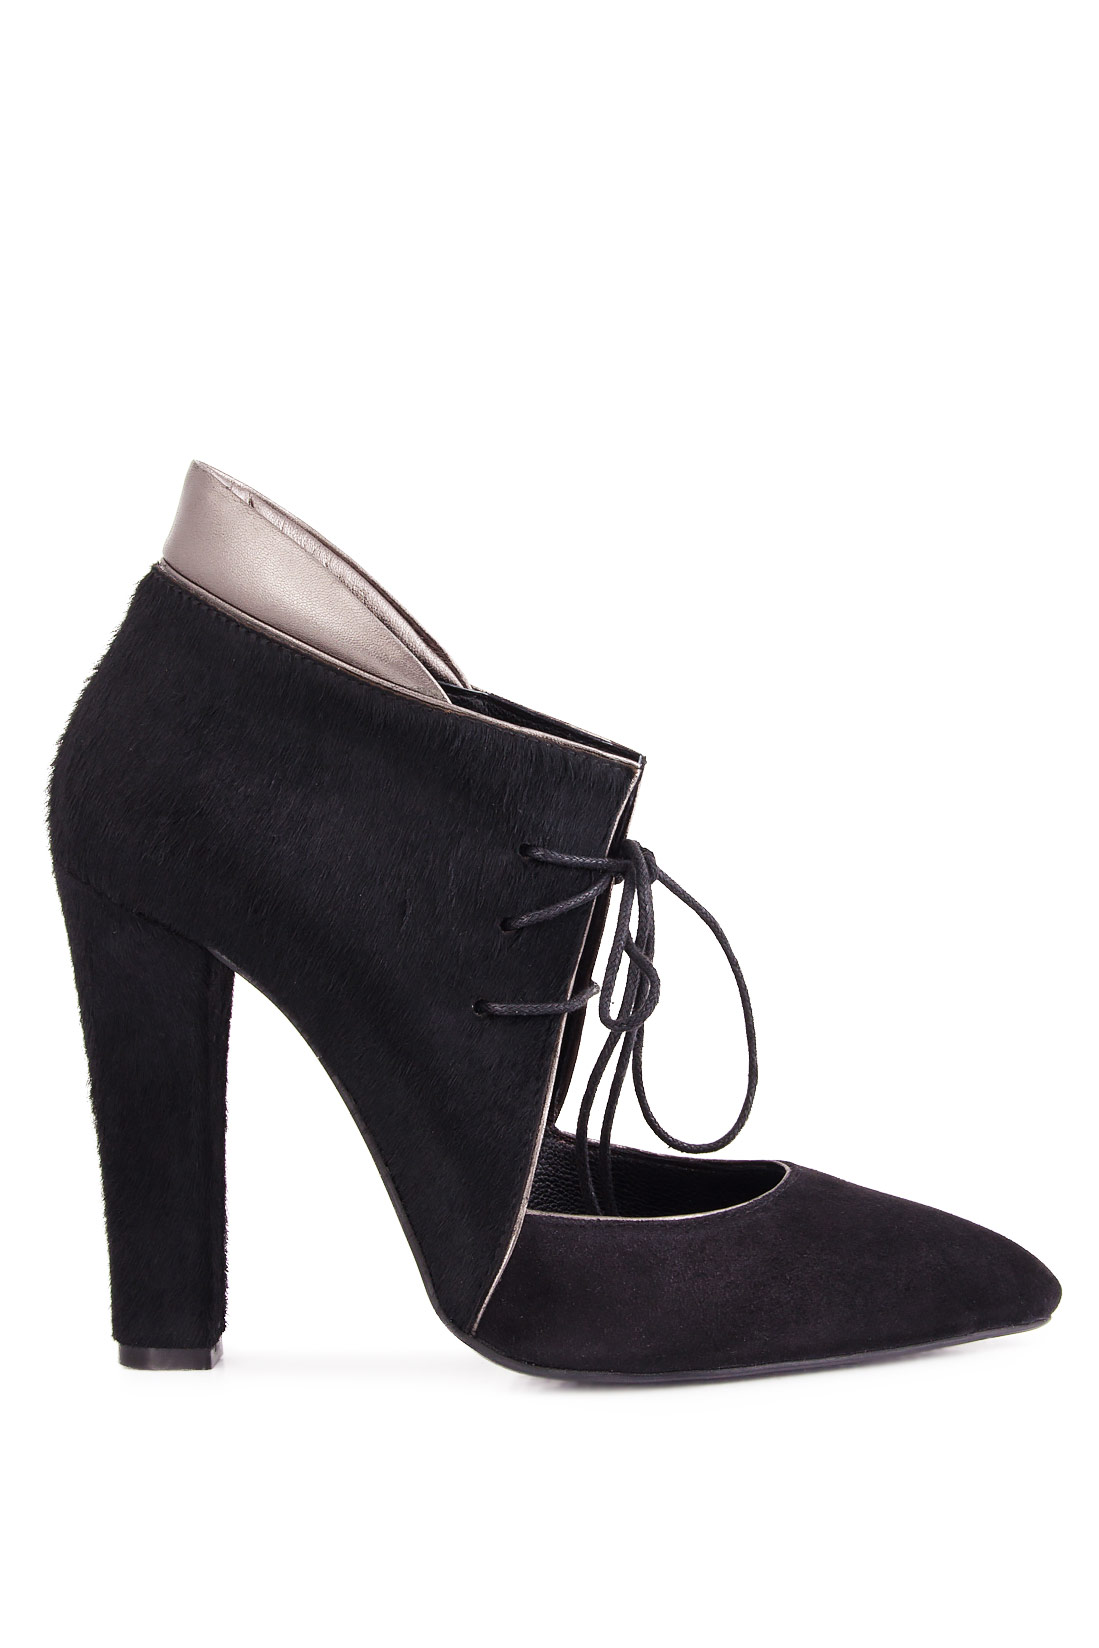 Suede ankle boots Ana Kaloni image 0